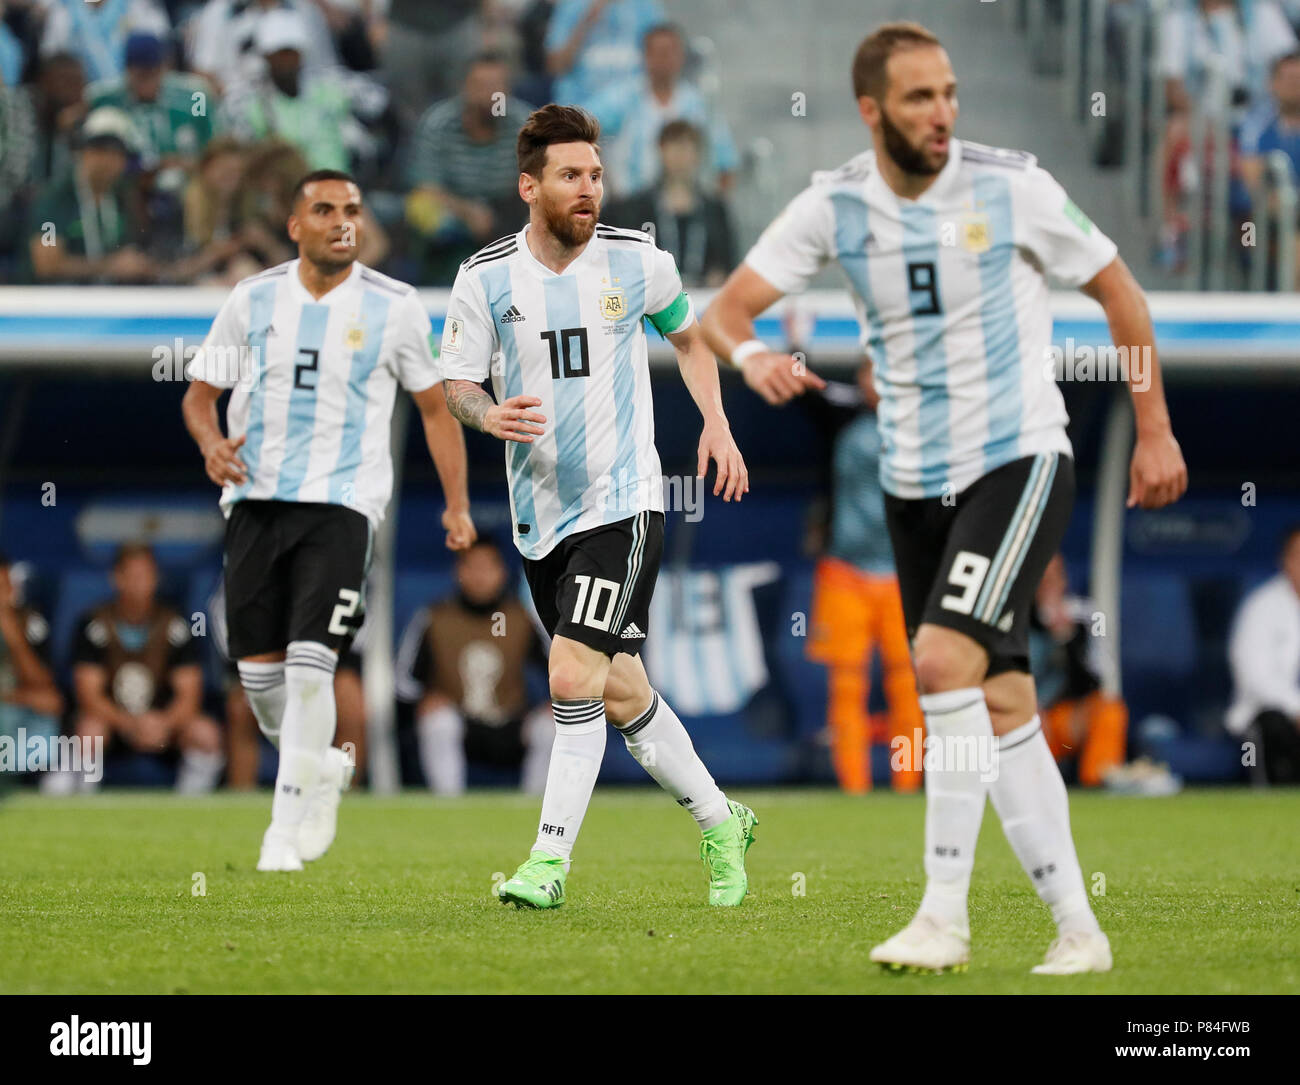 SAINT PETERSBURG, RUSSIA - JUNE 26: (L to R) Gabriel Mercado, Lionel Messi and Gonzalo Higuain of Argentina national team during the 2018 FIFA World Cup Russia group D match between Nigeria and Argentina at Saint Petersburg Stadium on June 26, 2018 in Saint Petersburg, Russia. (MB Media) Stock Photo